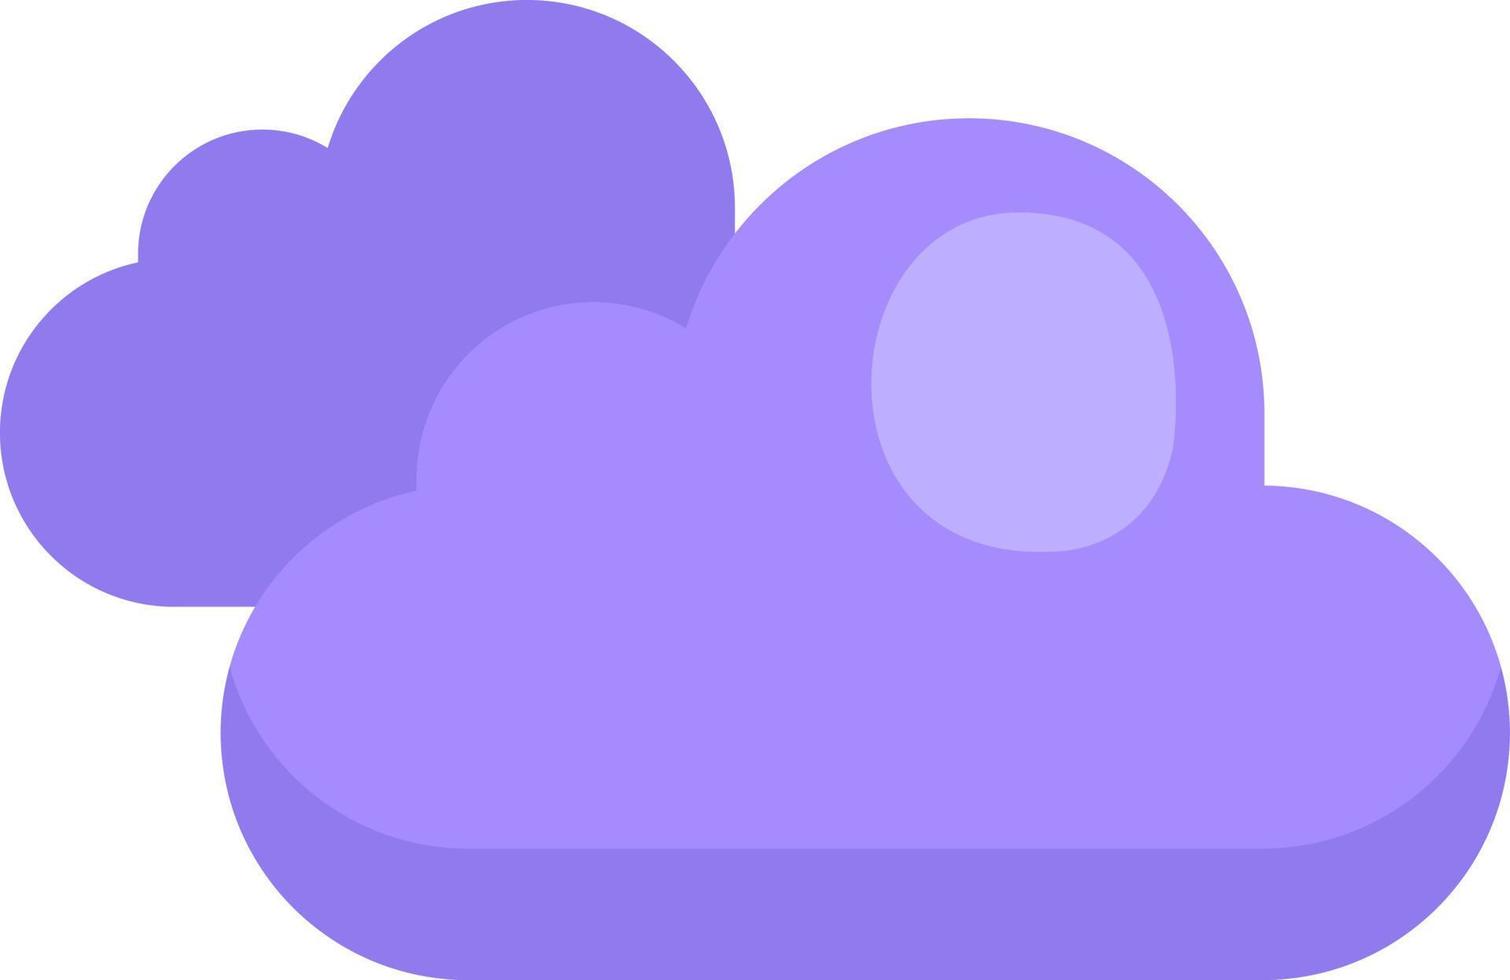 Two clouds, illustration, vector on a white background.